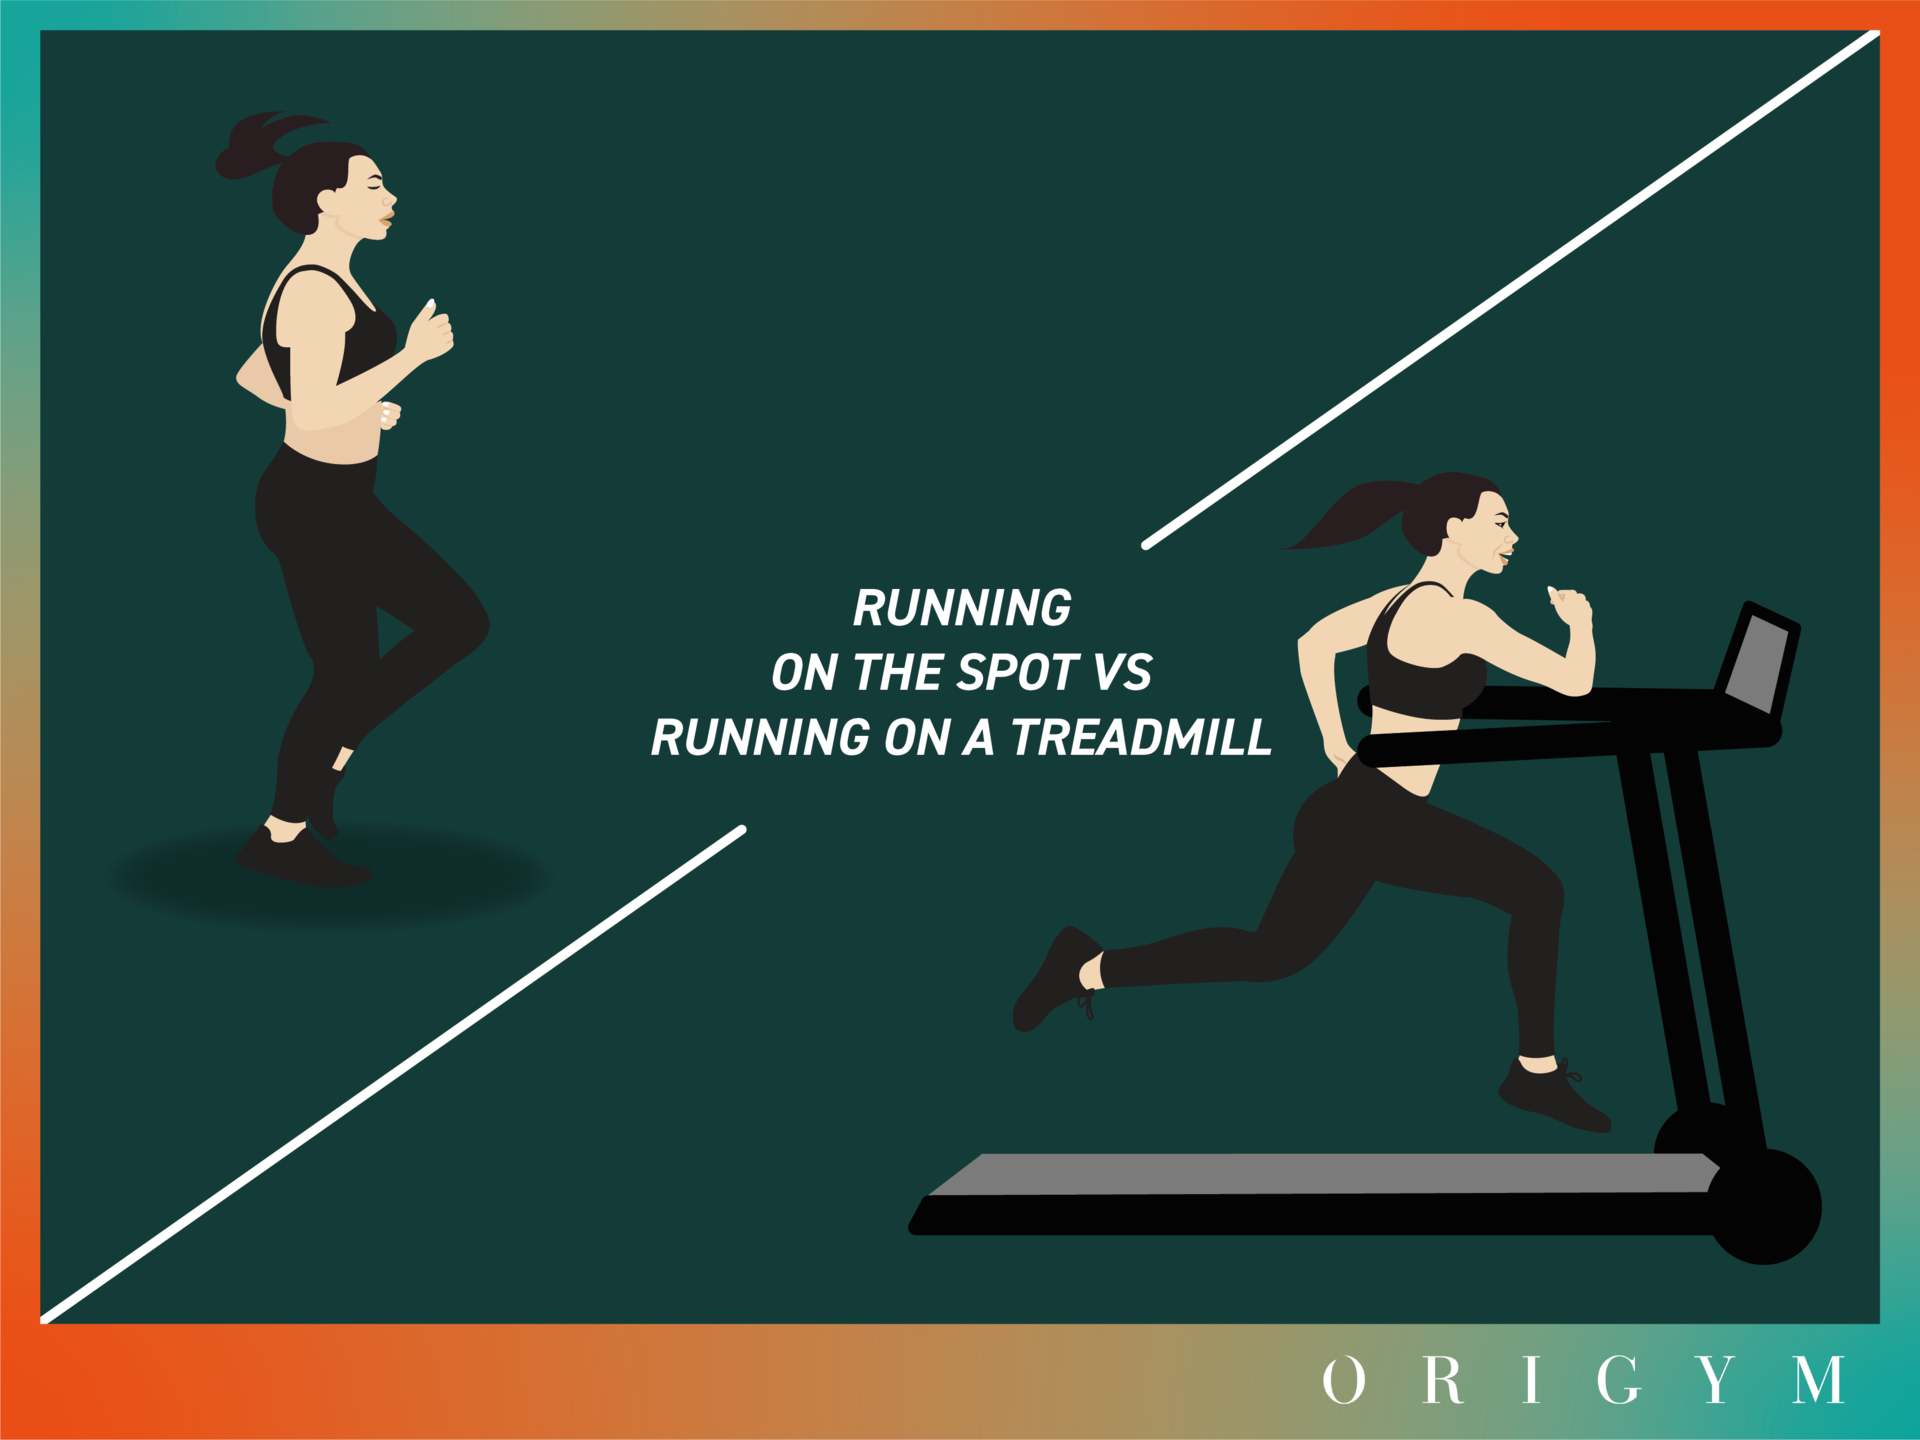 Running on the Spot: Benefits, Risks & More